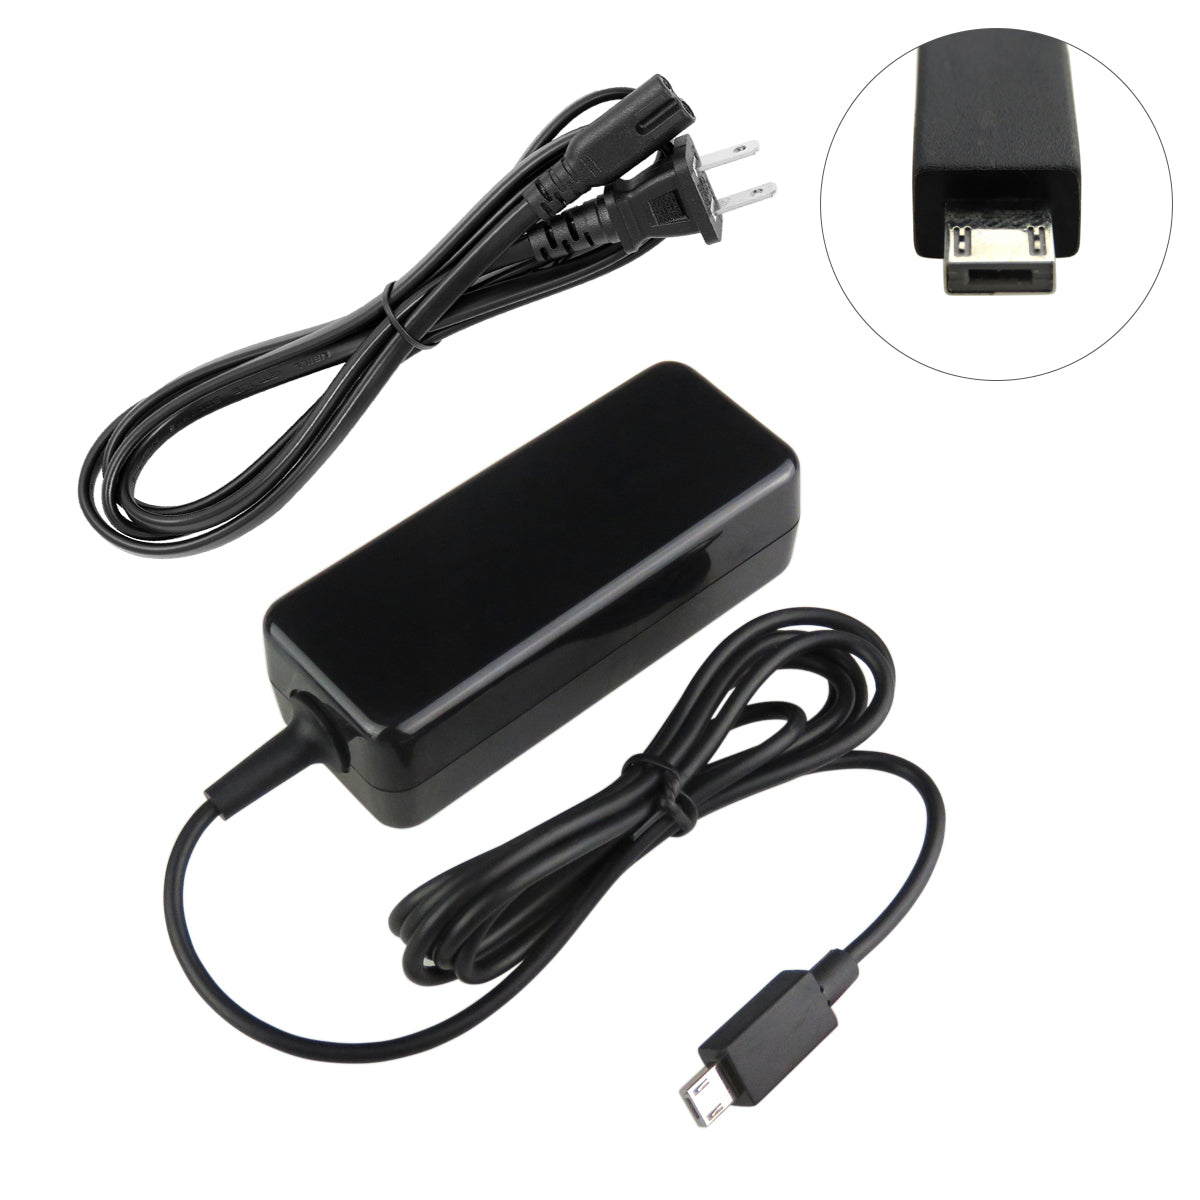 Charger for ASUS EeeBook E205SA Laptop.